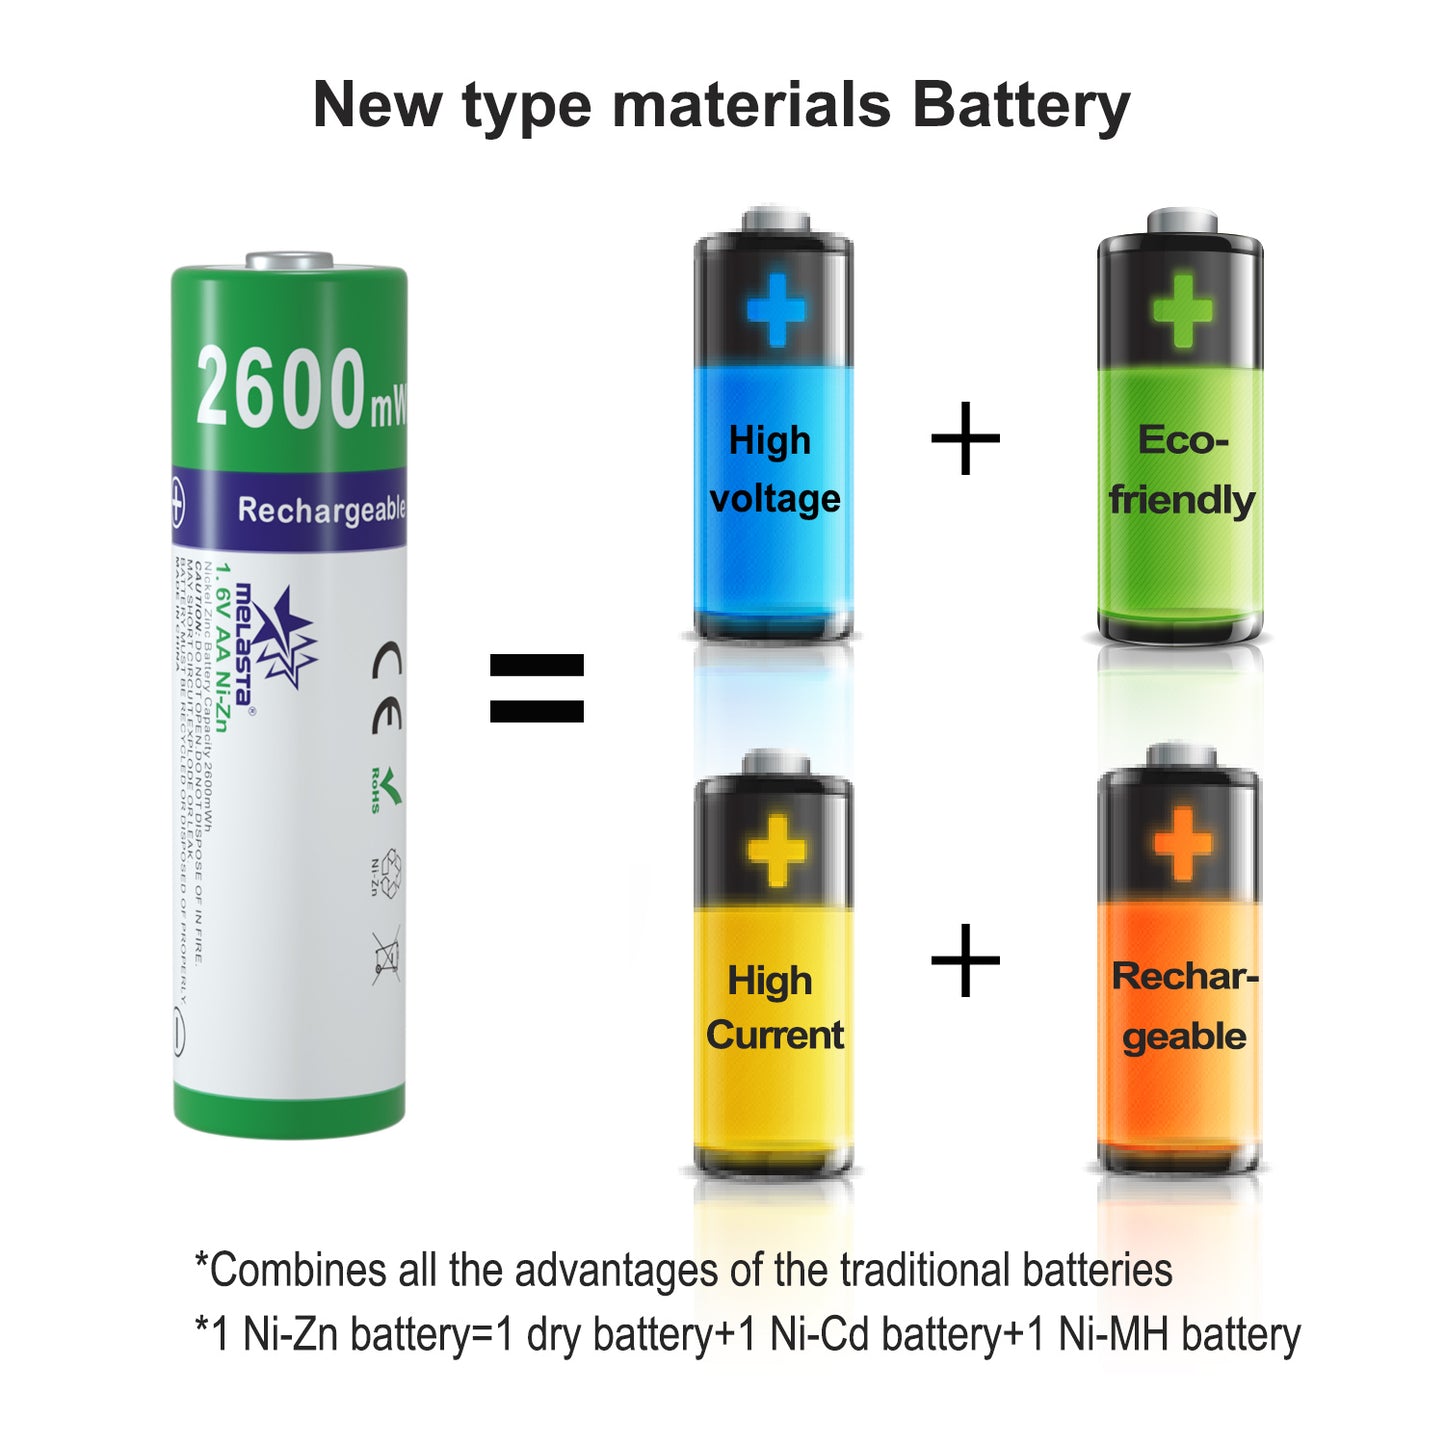 8PCS AA 1.6V 2600mWh NIZN Rechargeable Battery with 1 USB Charger